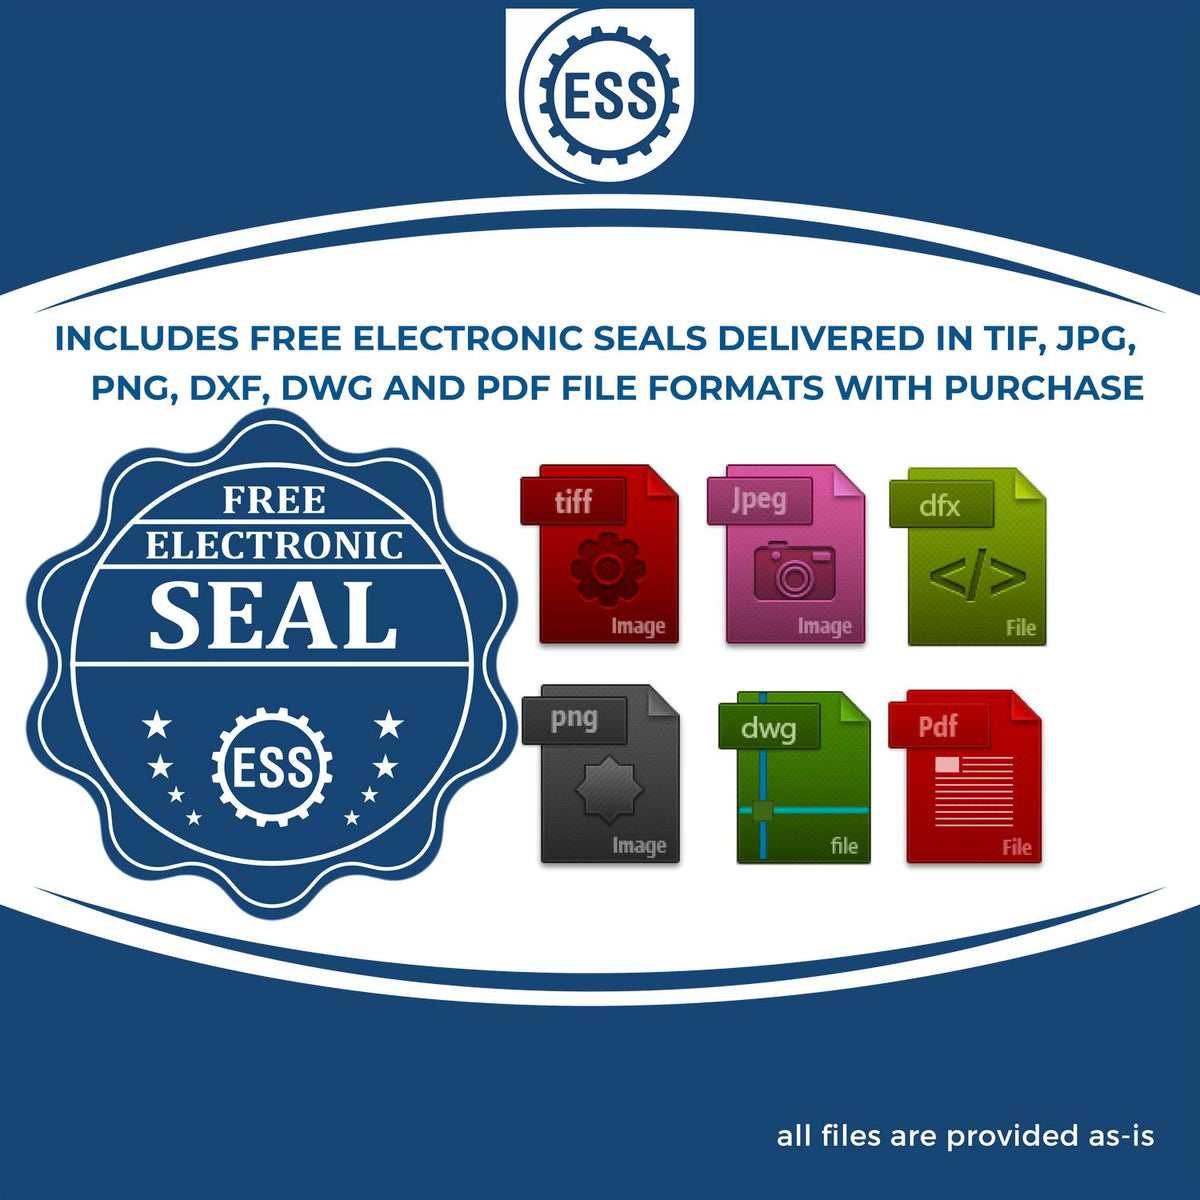 An infographic for the free electronic seal for the Hybrid Missouri Geologist Seal illustrating the different file type icons such as DXF, DWG, TIF, JPG and PNG.